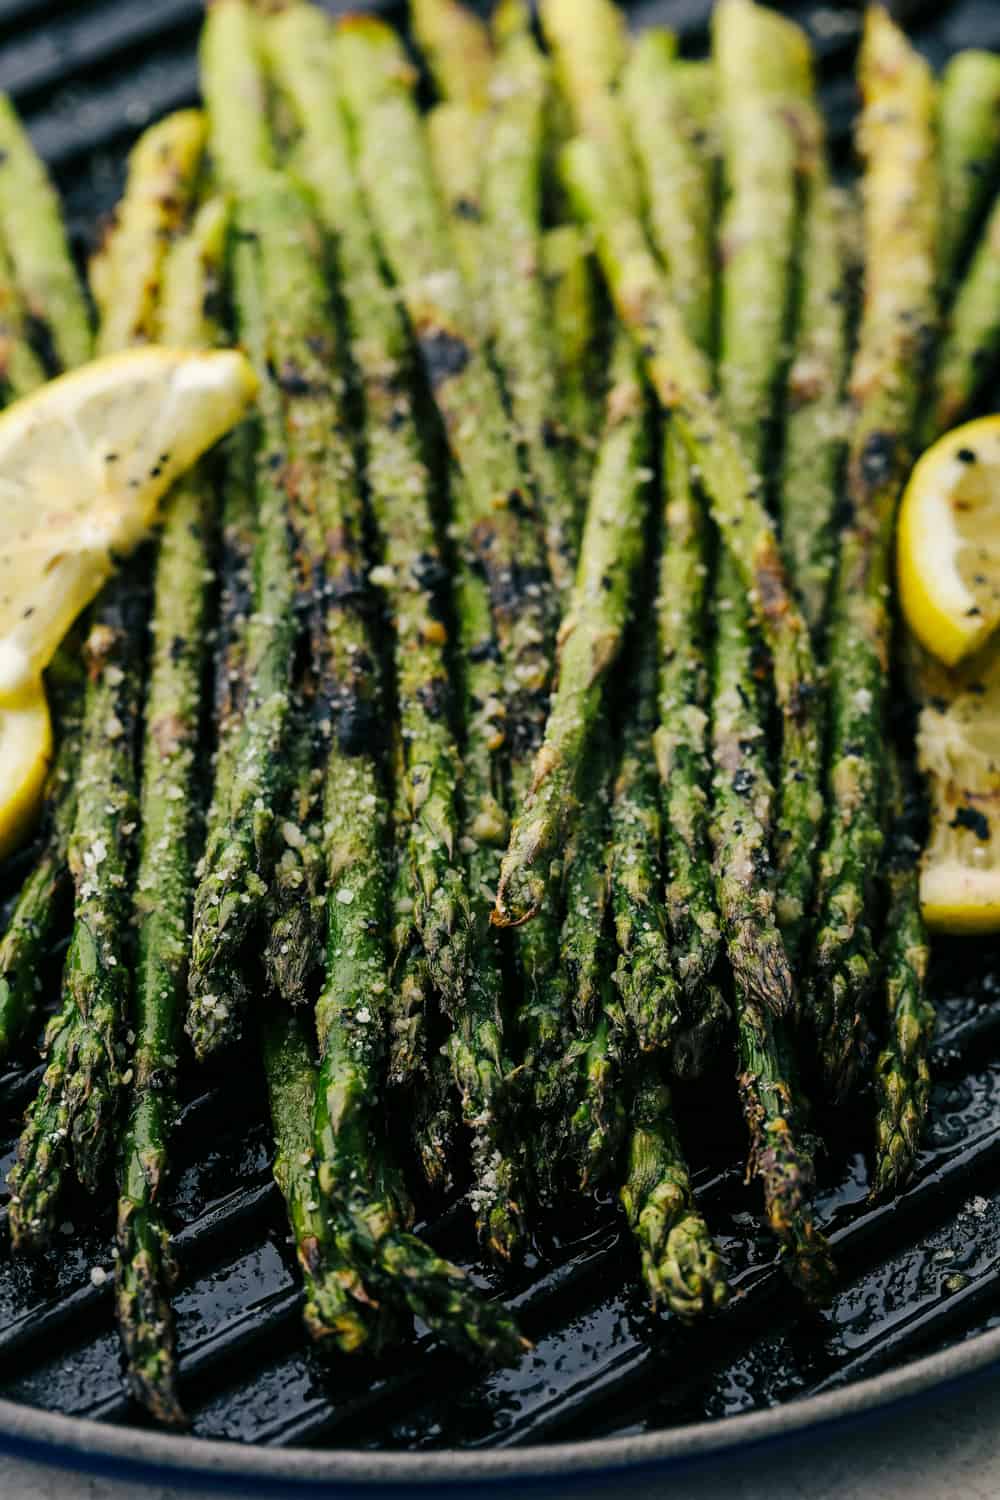 Asparagus on a barbecue plate with lemon slices on the side.